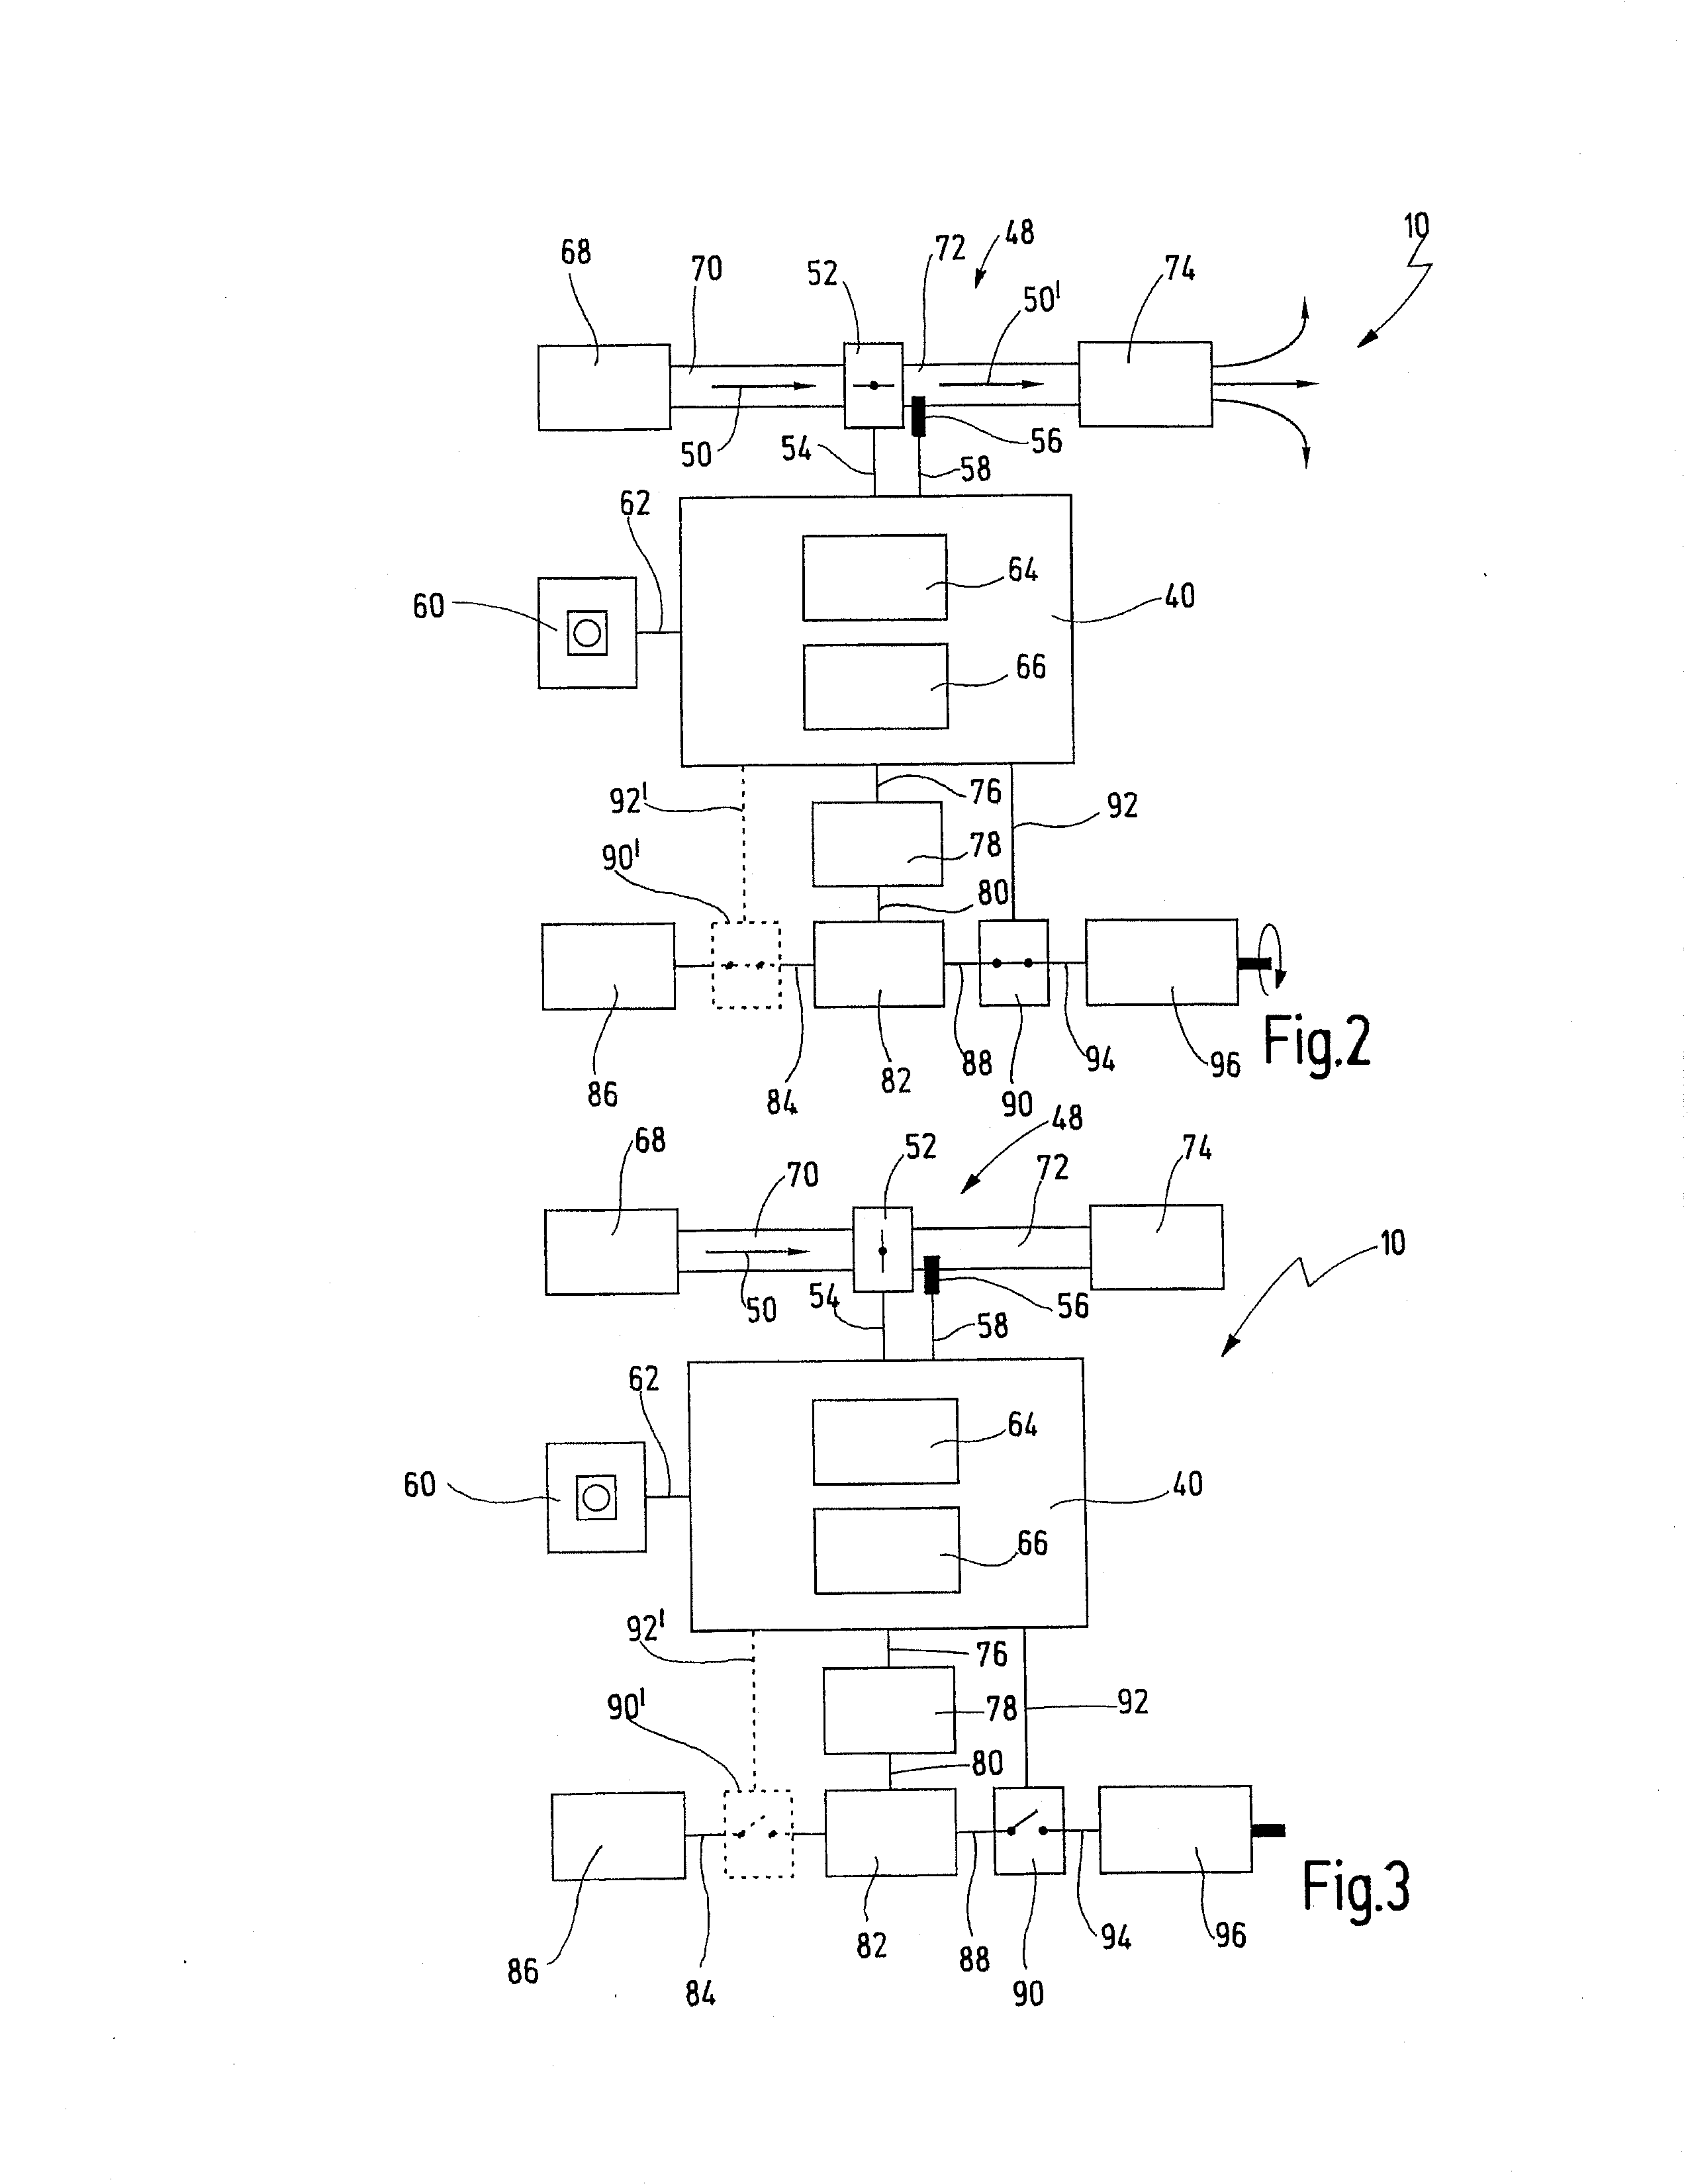 Machine having an air bearing and method for operating such a machine